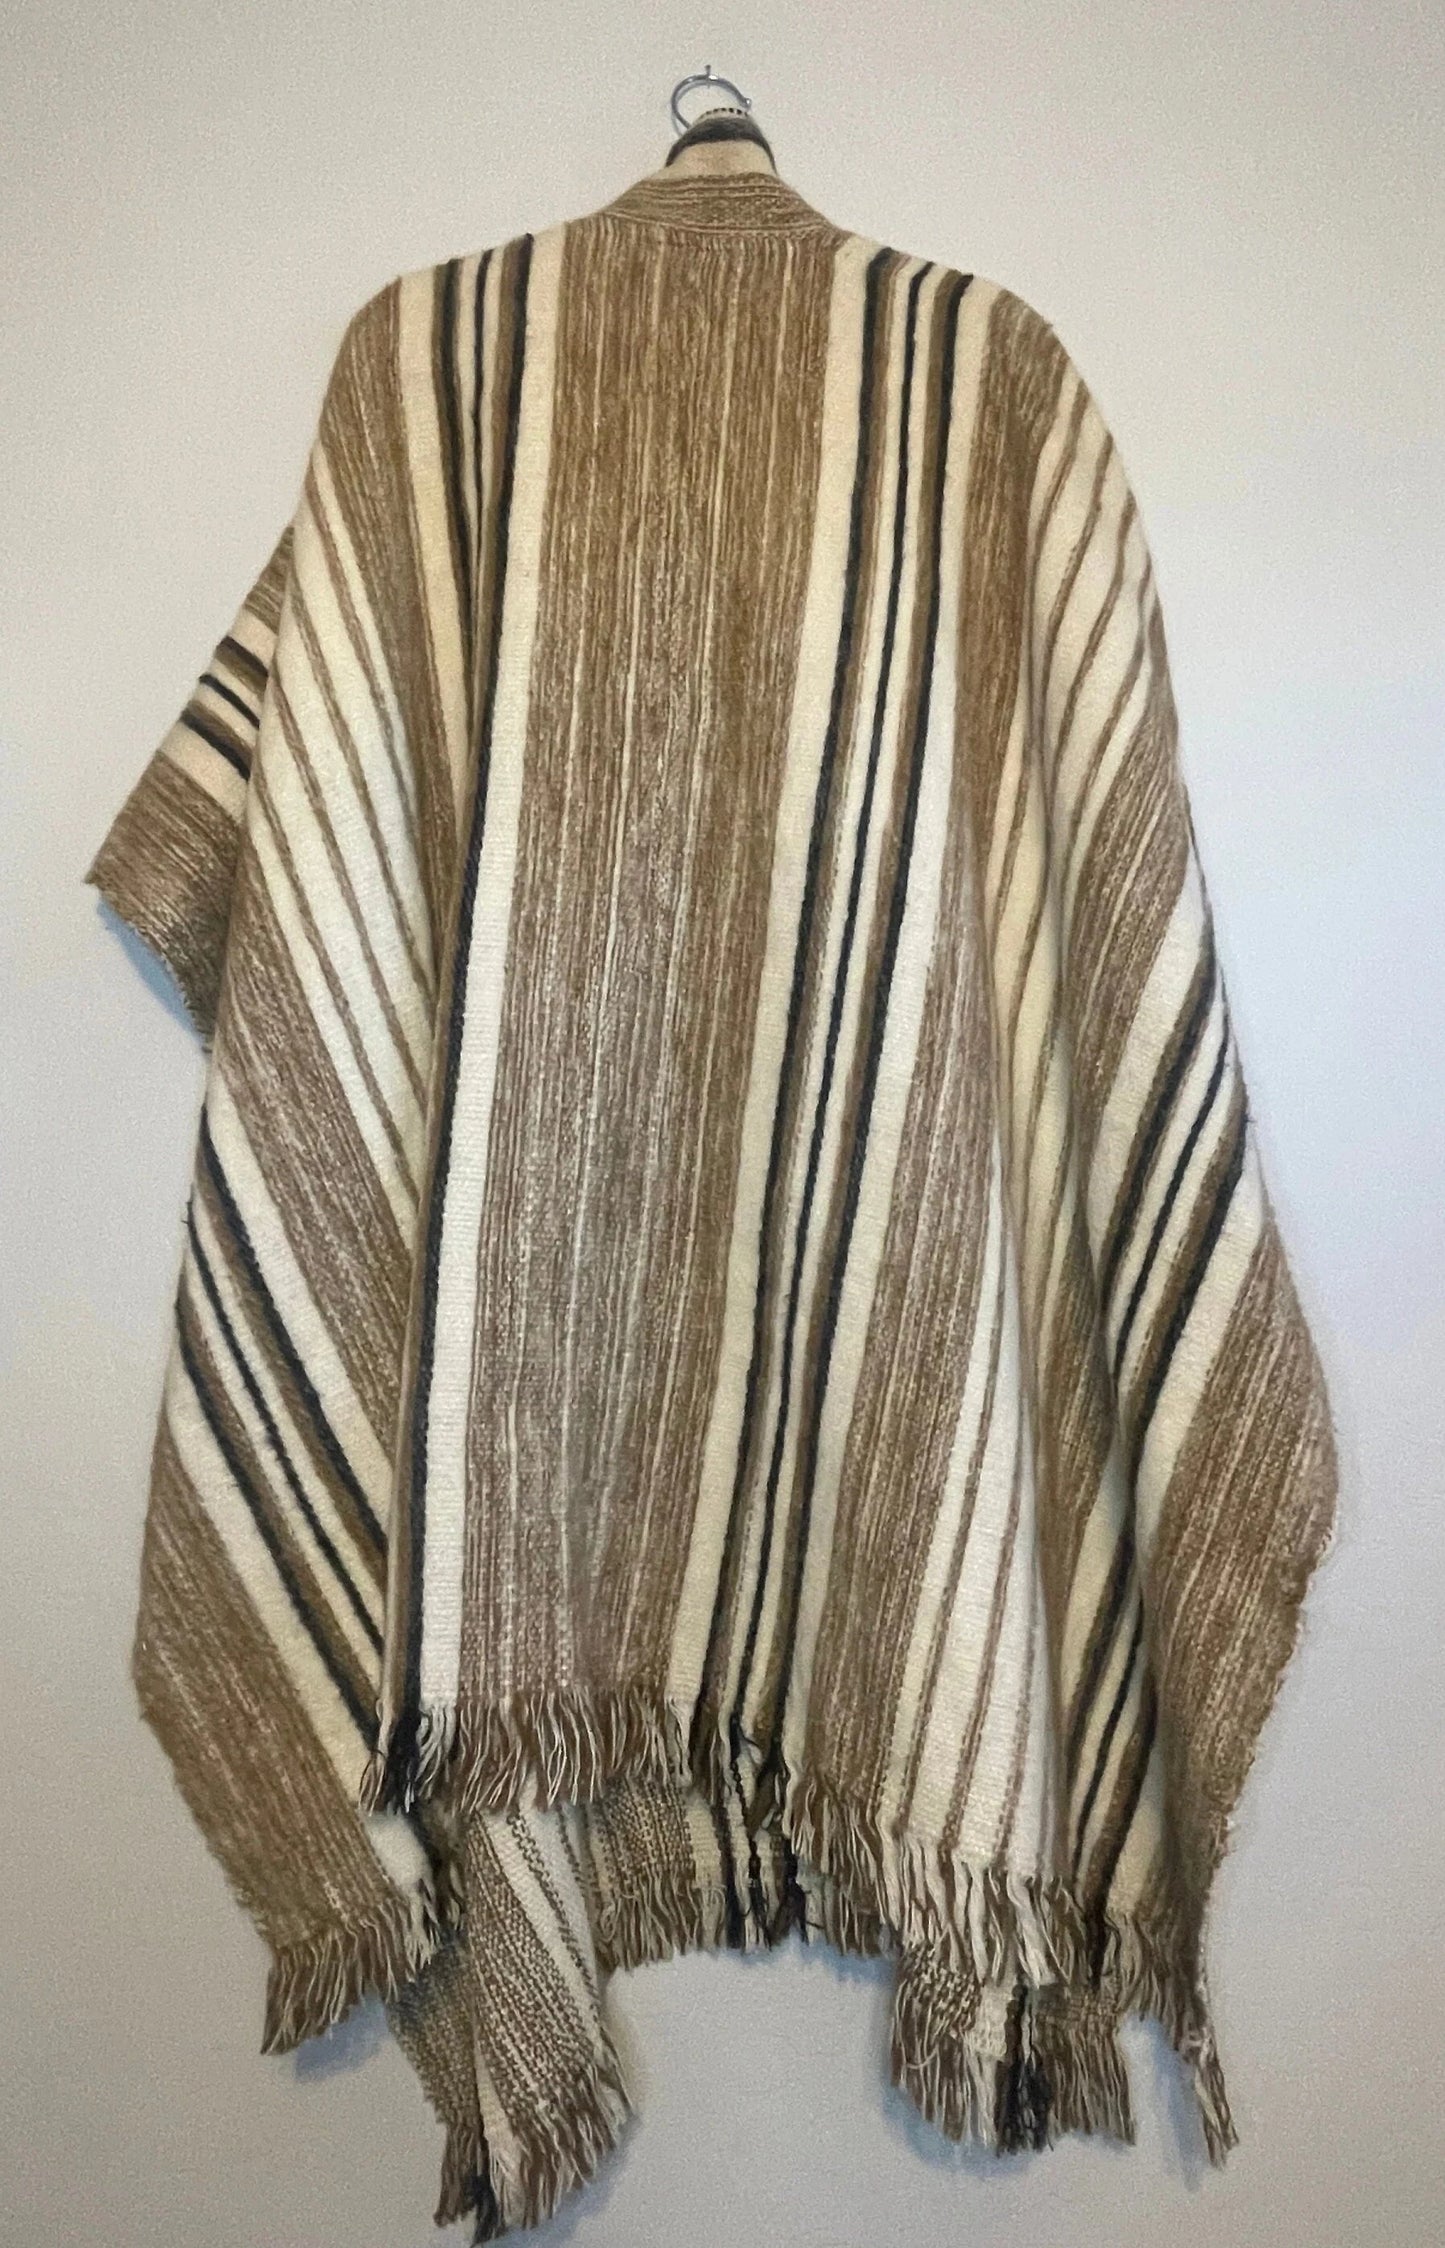 Vintage Authentic Striped Poncho